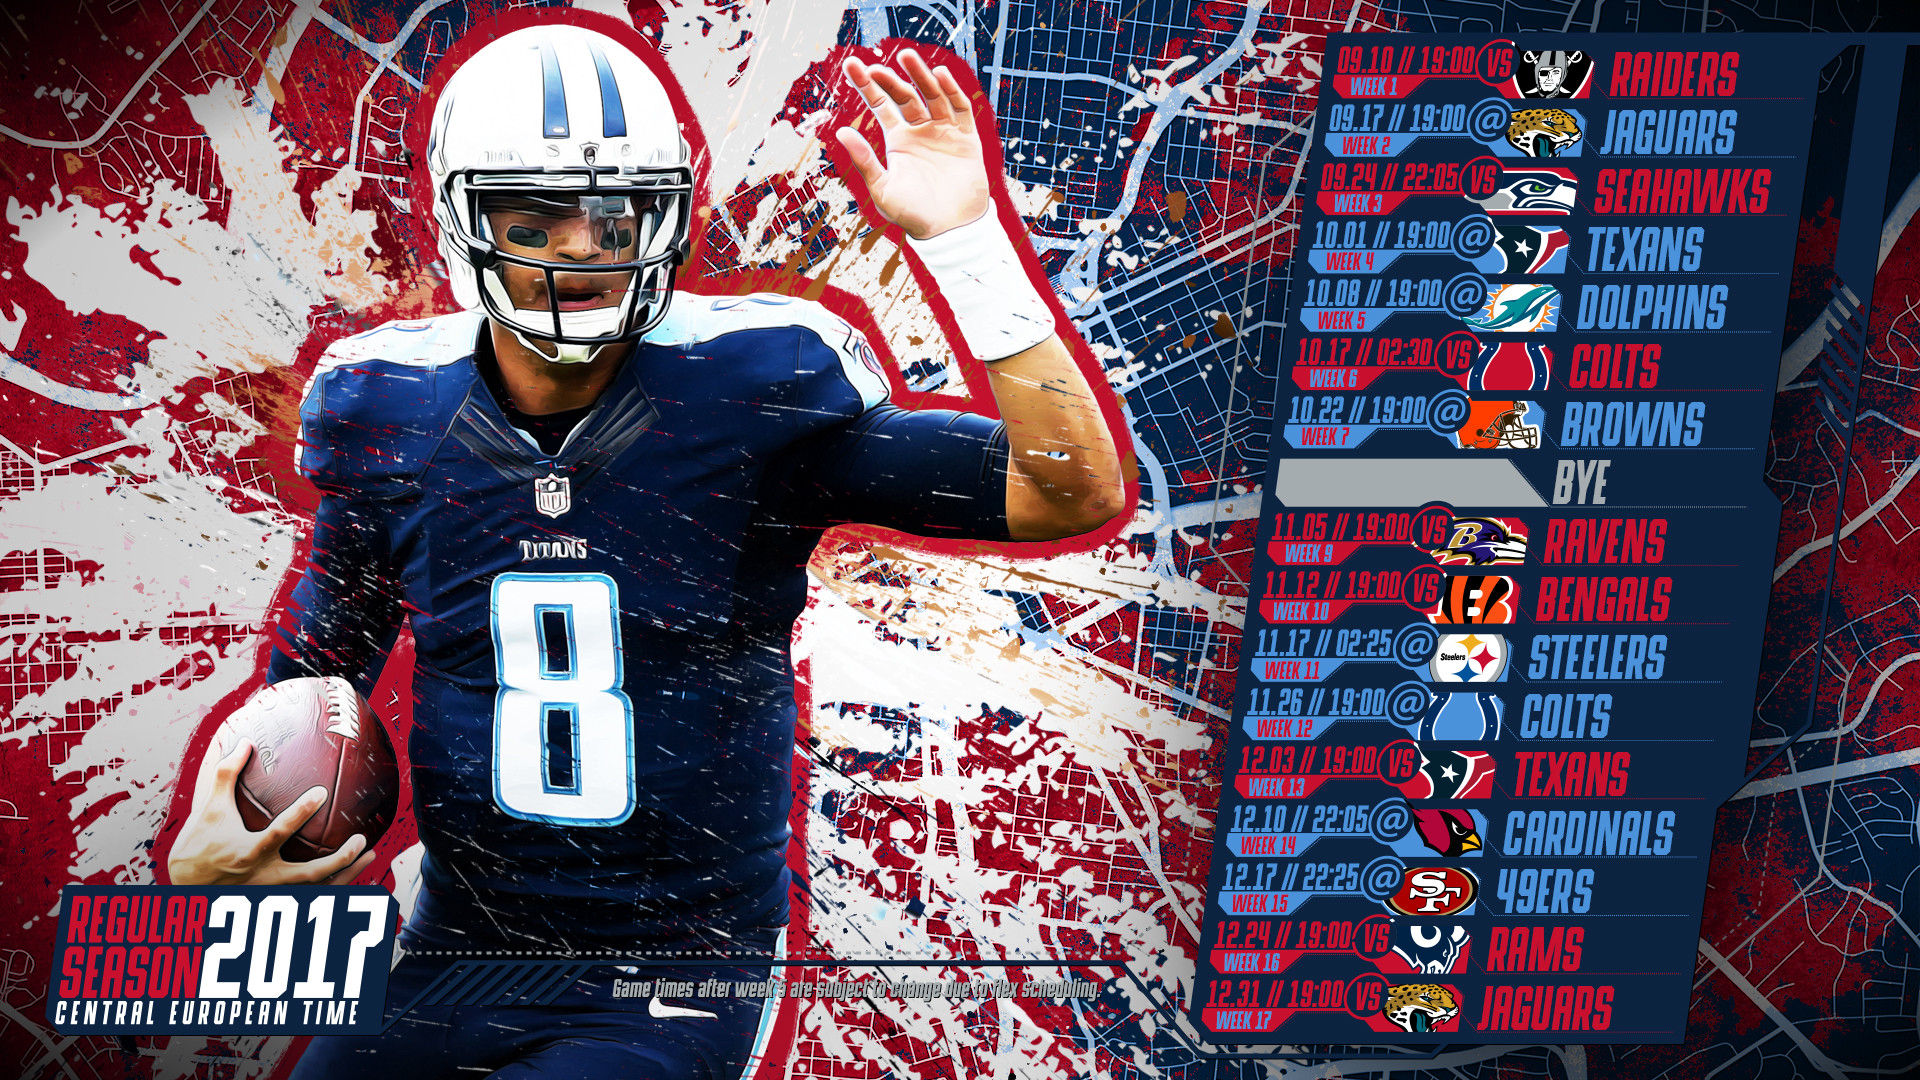 1920x1080 Schedule wallpaper for the Tennessee Titans Regular Season, 2017 Central  European Time. Made by